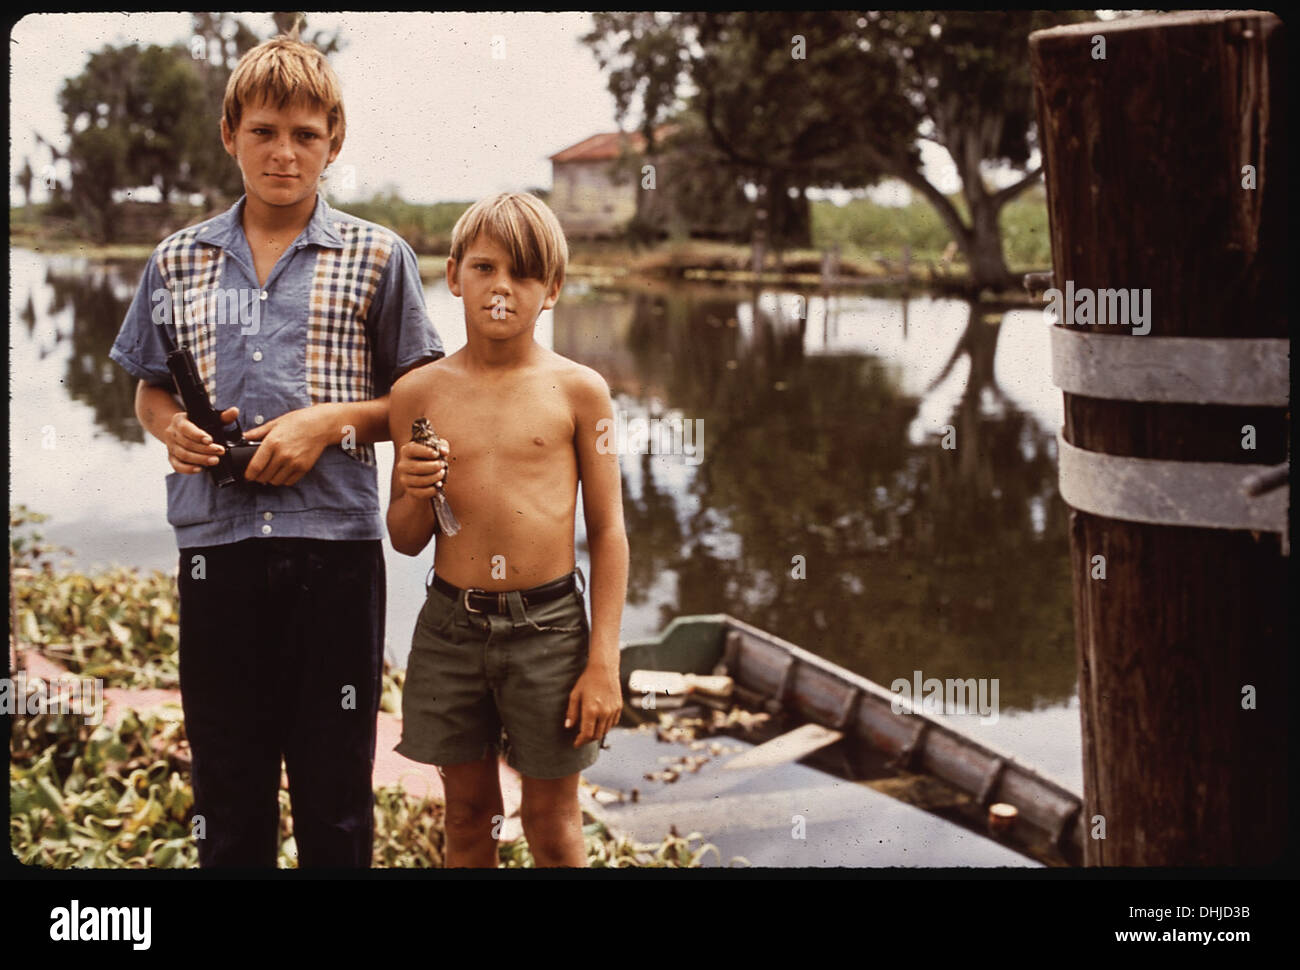 BOYS WITH AIRGUN AND BIRD. THESE FISHERMAN'S SONS LIVE IN BAYOU GAUCHE, DEEP IN THE WETLANDS OF LOUISIANA 194 Stock Photo